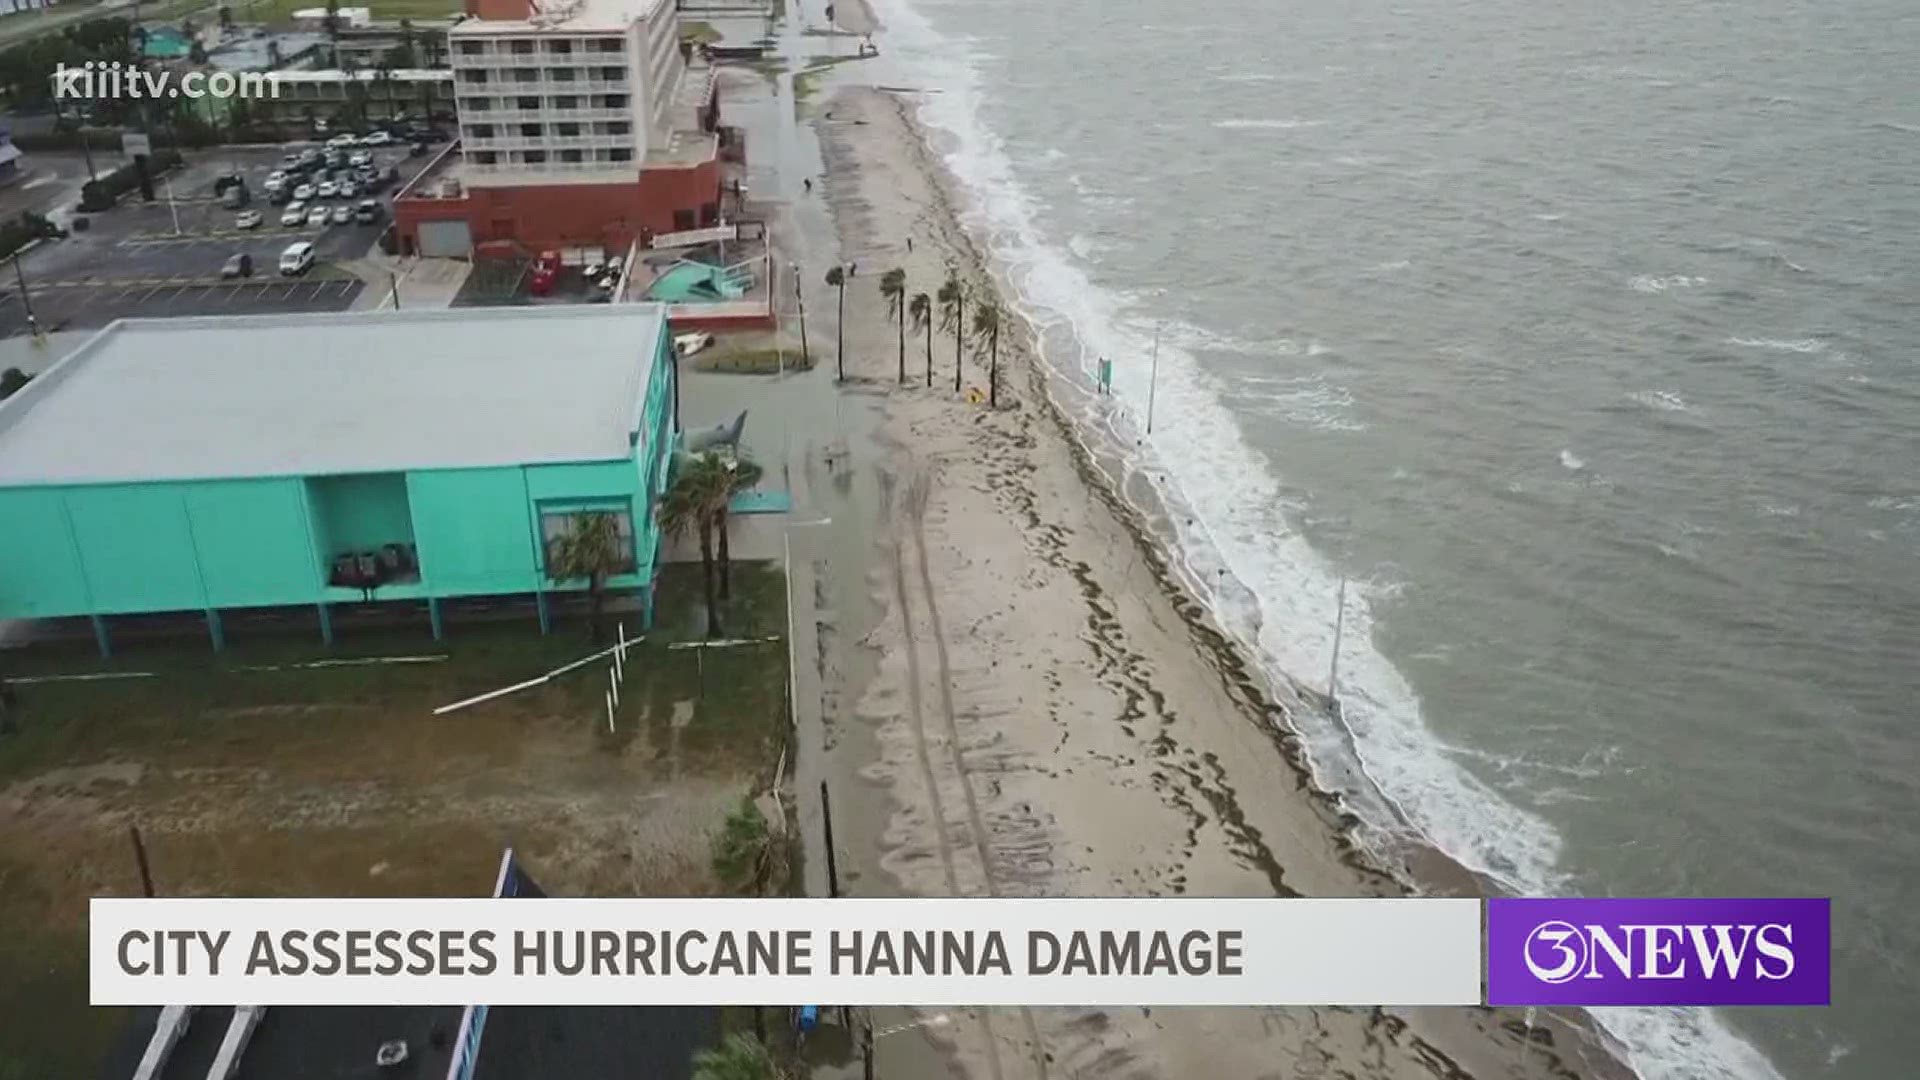 300 City employees are cleaning up debris left by Hurricane Hanna.